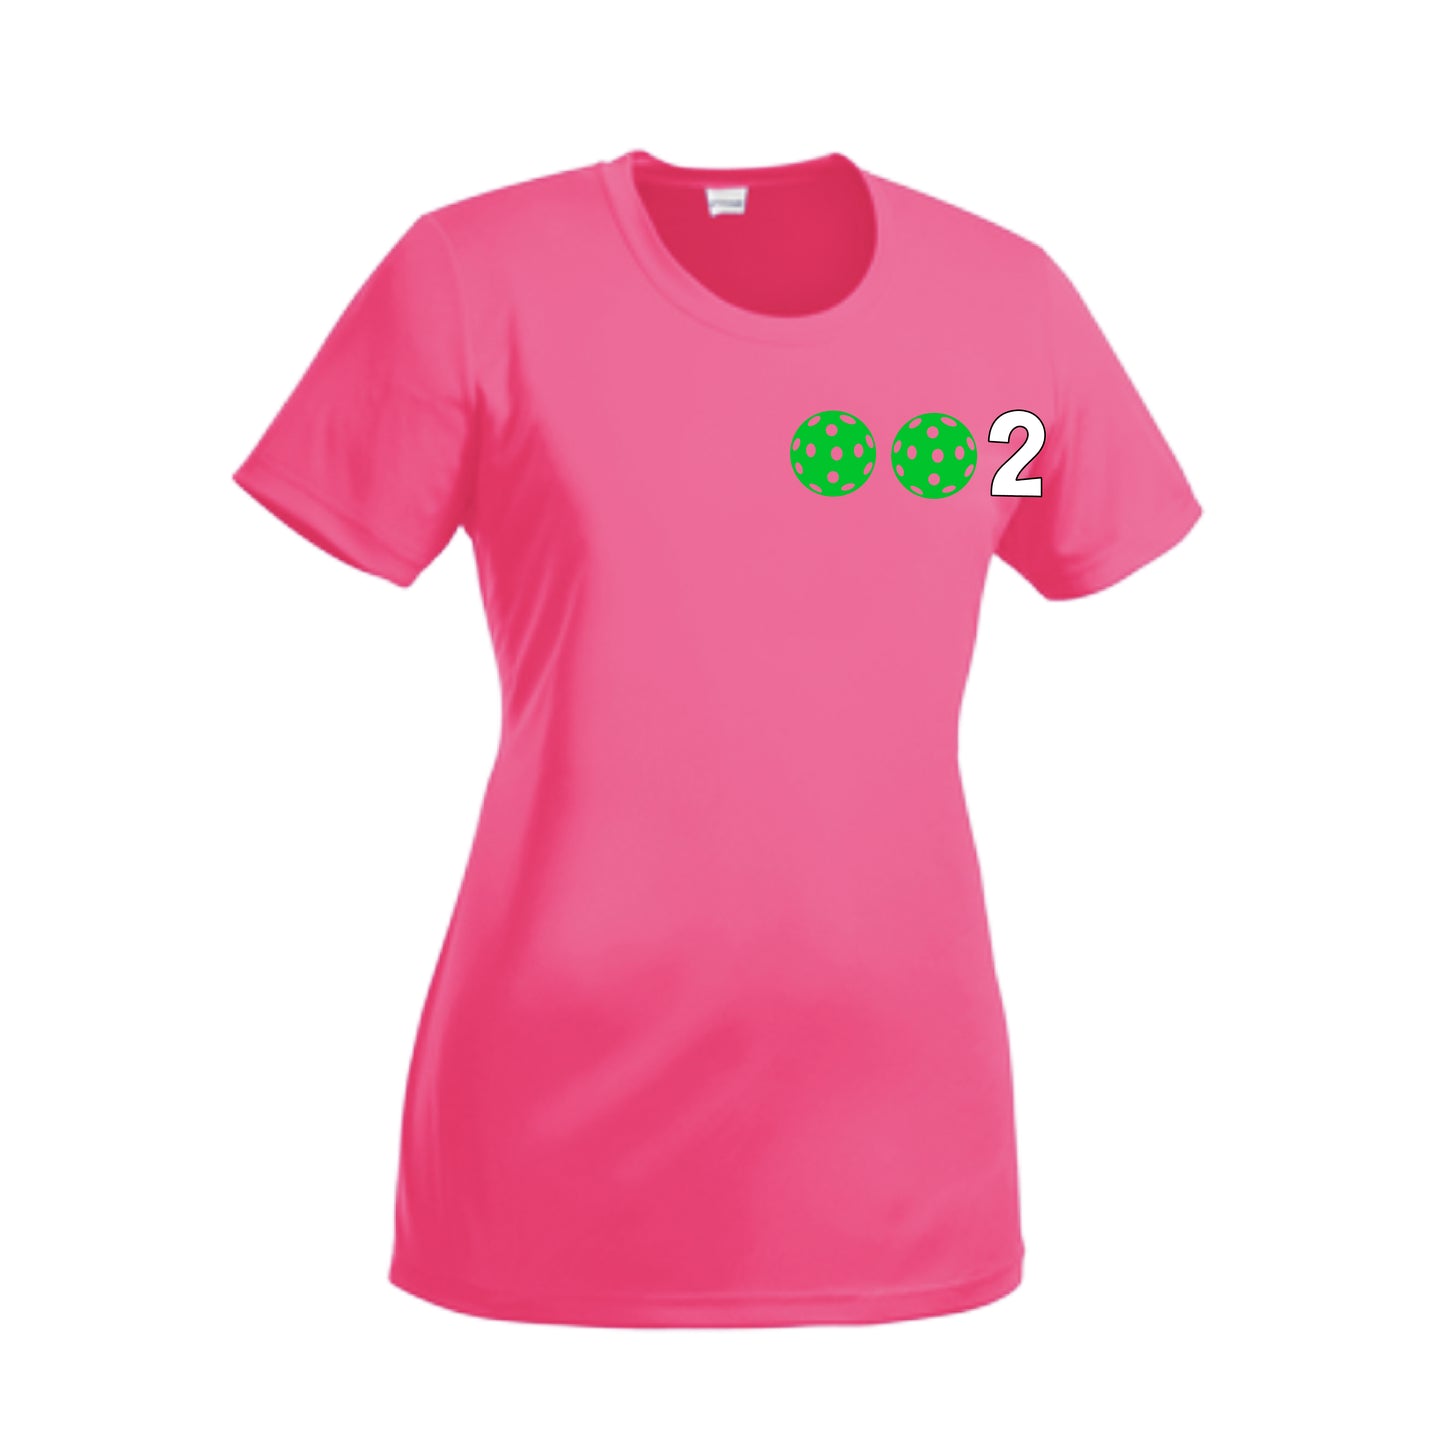 002 With Pickleballs (Green Orange Red) Customizable | Women’s Short Sleeve Crewneck Athletic Shirts | 100% Polyester